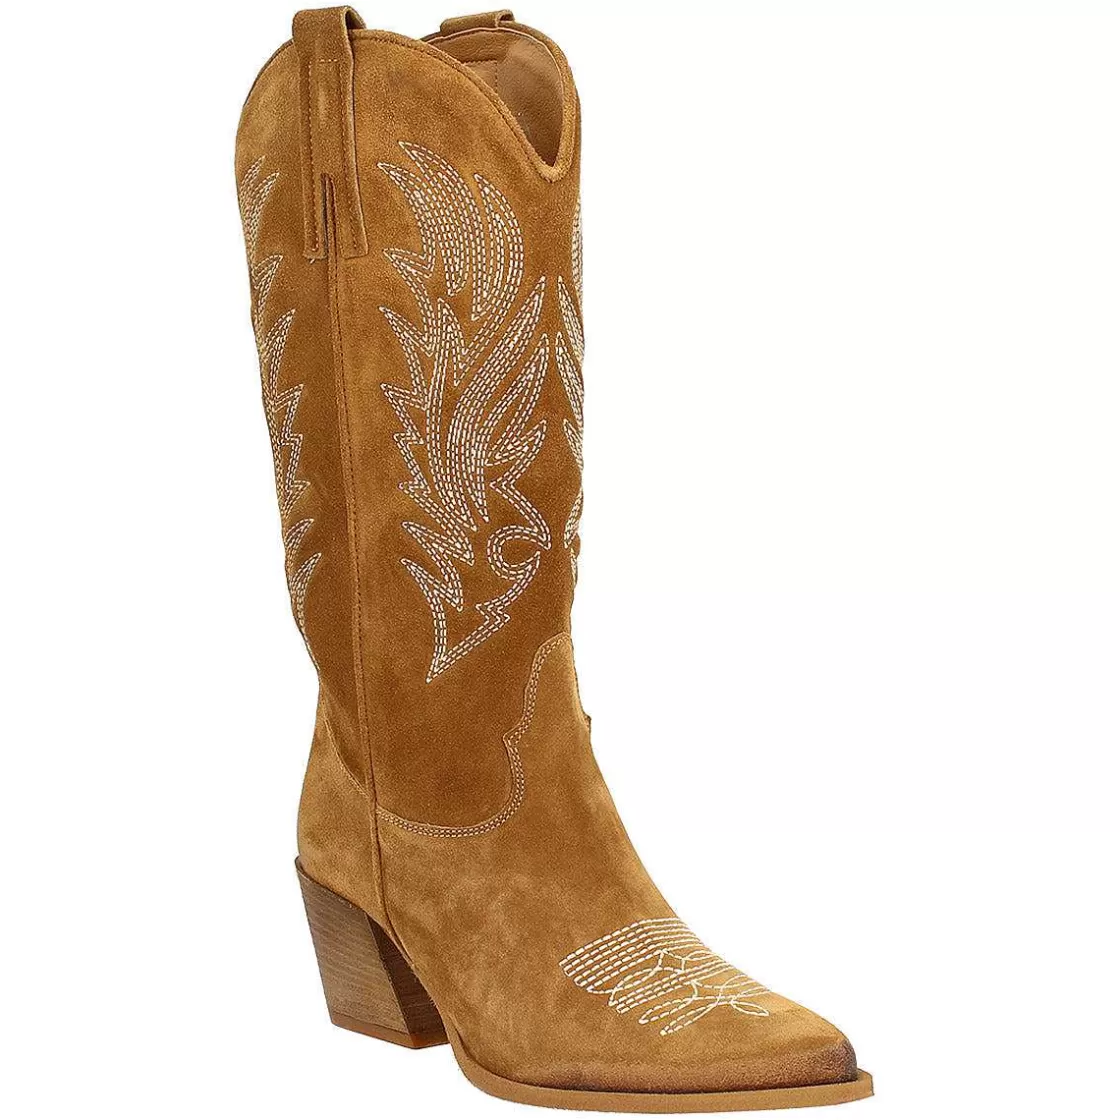 Leonardo Women'S Texan Ankle Boot In Tan-Colored Suede With Embroidery. Best